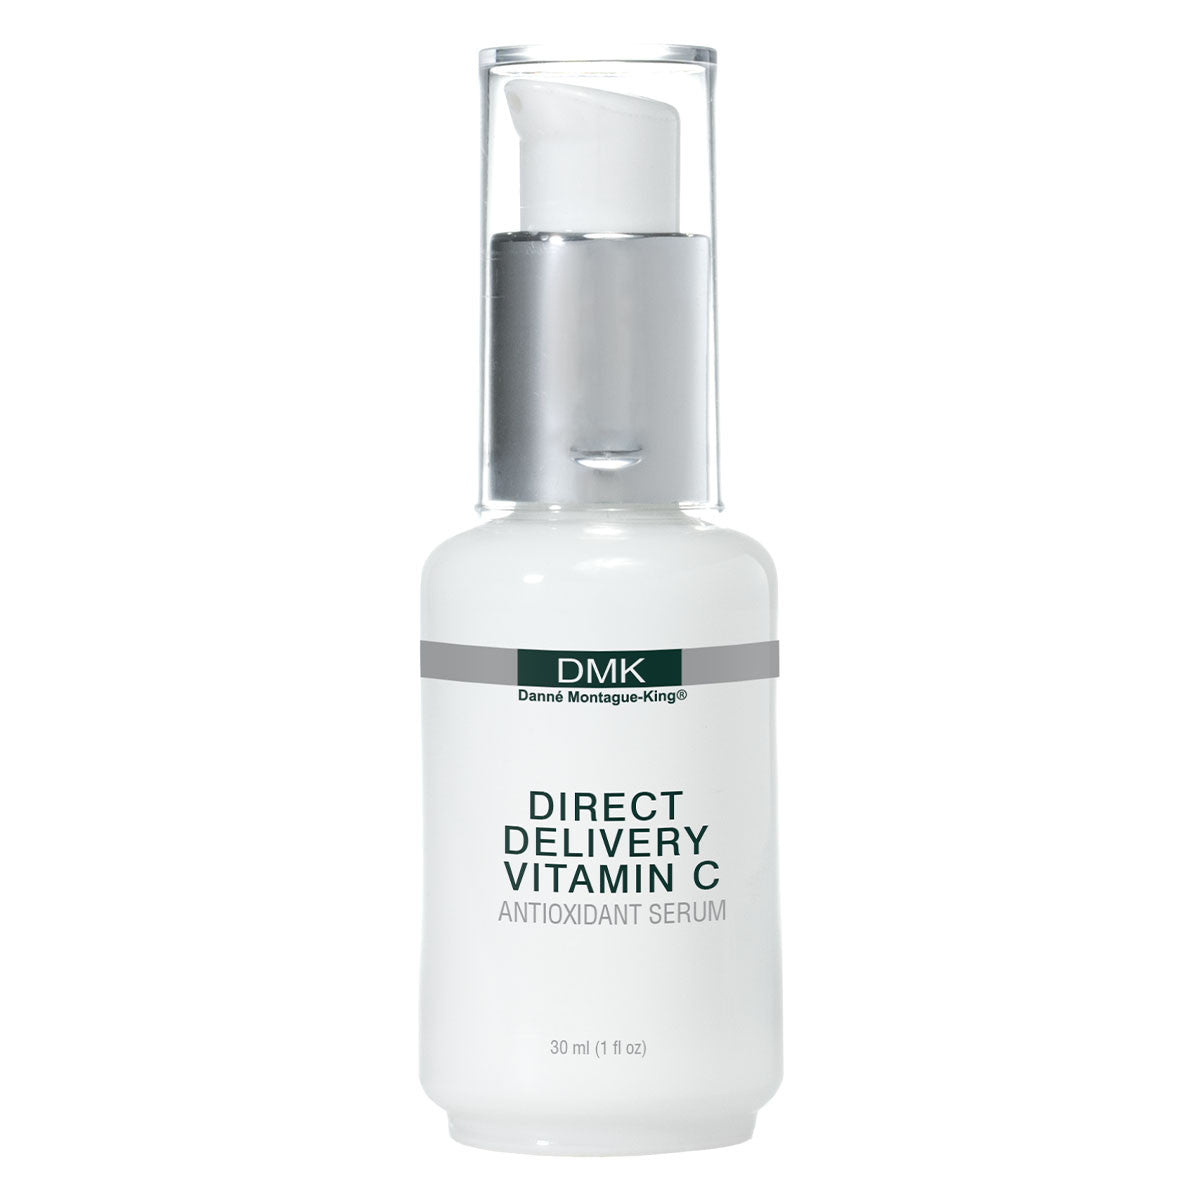 Direct Delivery Vitamin C Serum is a sophisticated answer to assist in preventing and reversing the signs of biological and environmental aging. It is highly recommended for men and women of all ages and is suitable for aging, sun damage, fine lines, wrinkles, pigmentation, and scarring, with 4 different types of vitamin C.